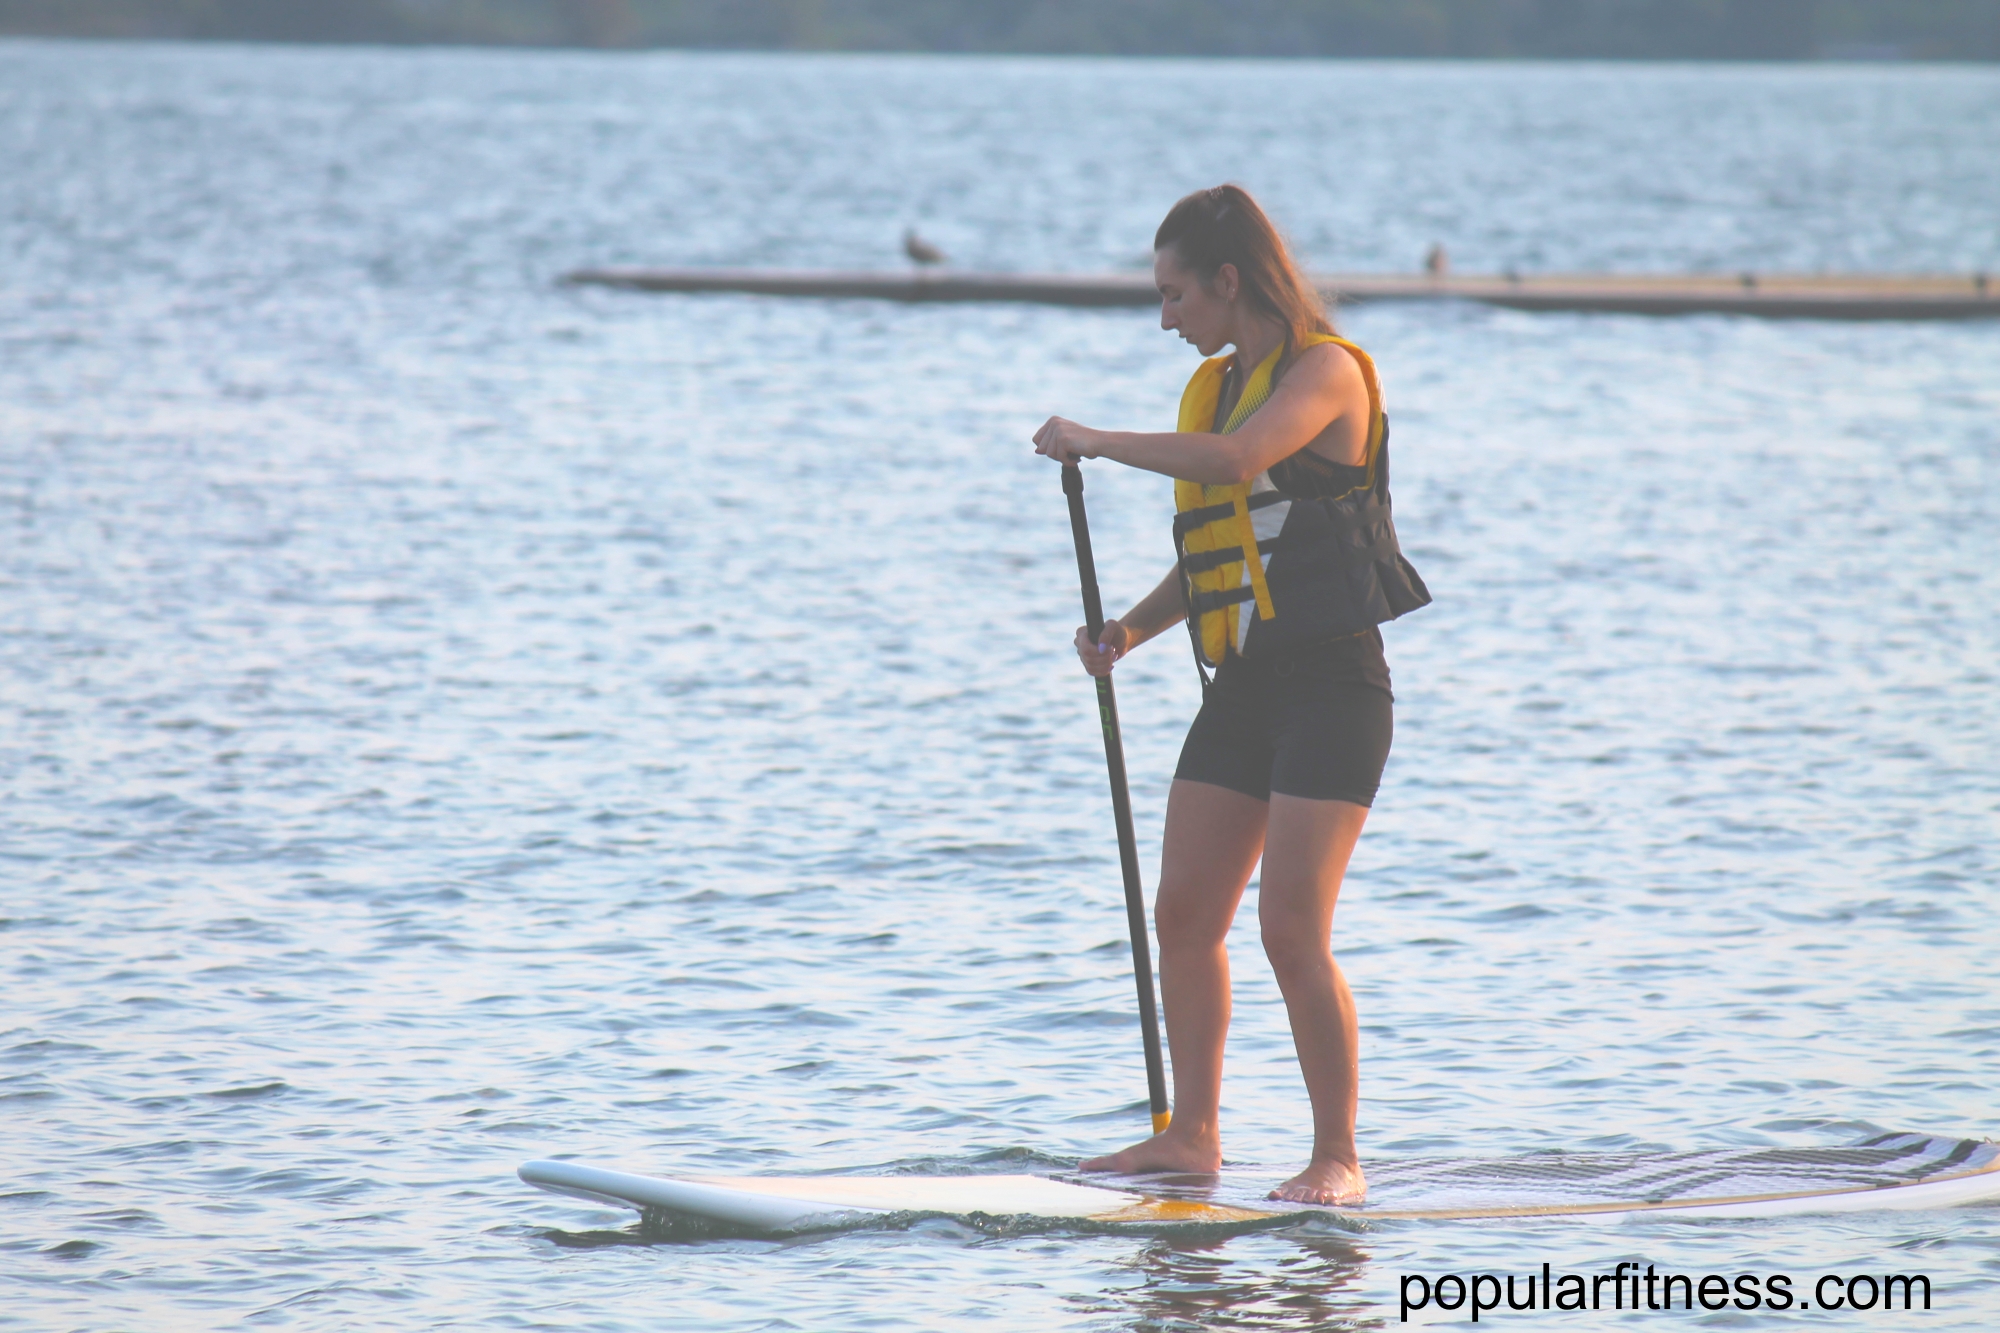 Paddle boarding on a paddleboard on the lake while standing up - photo by popular fitness